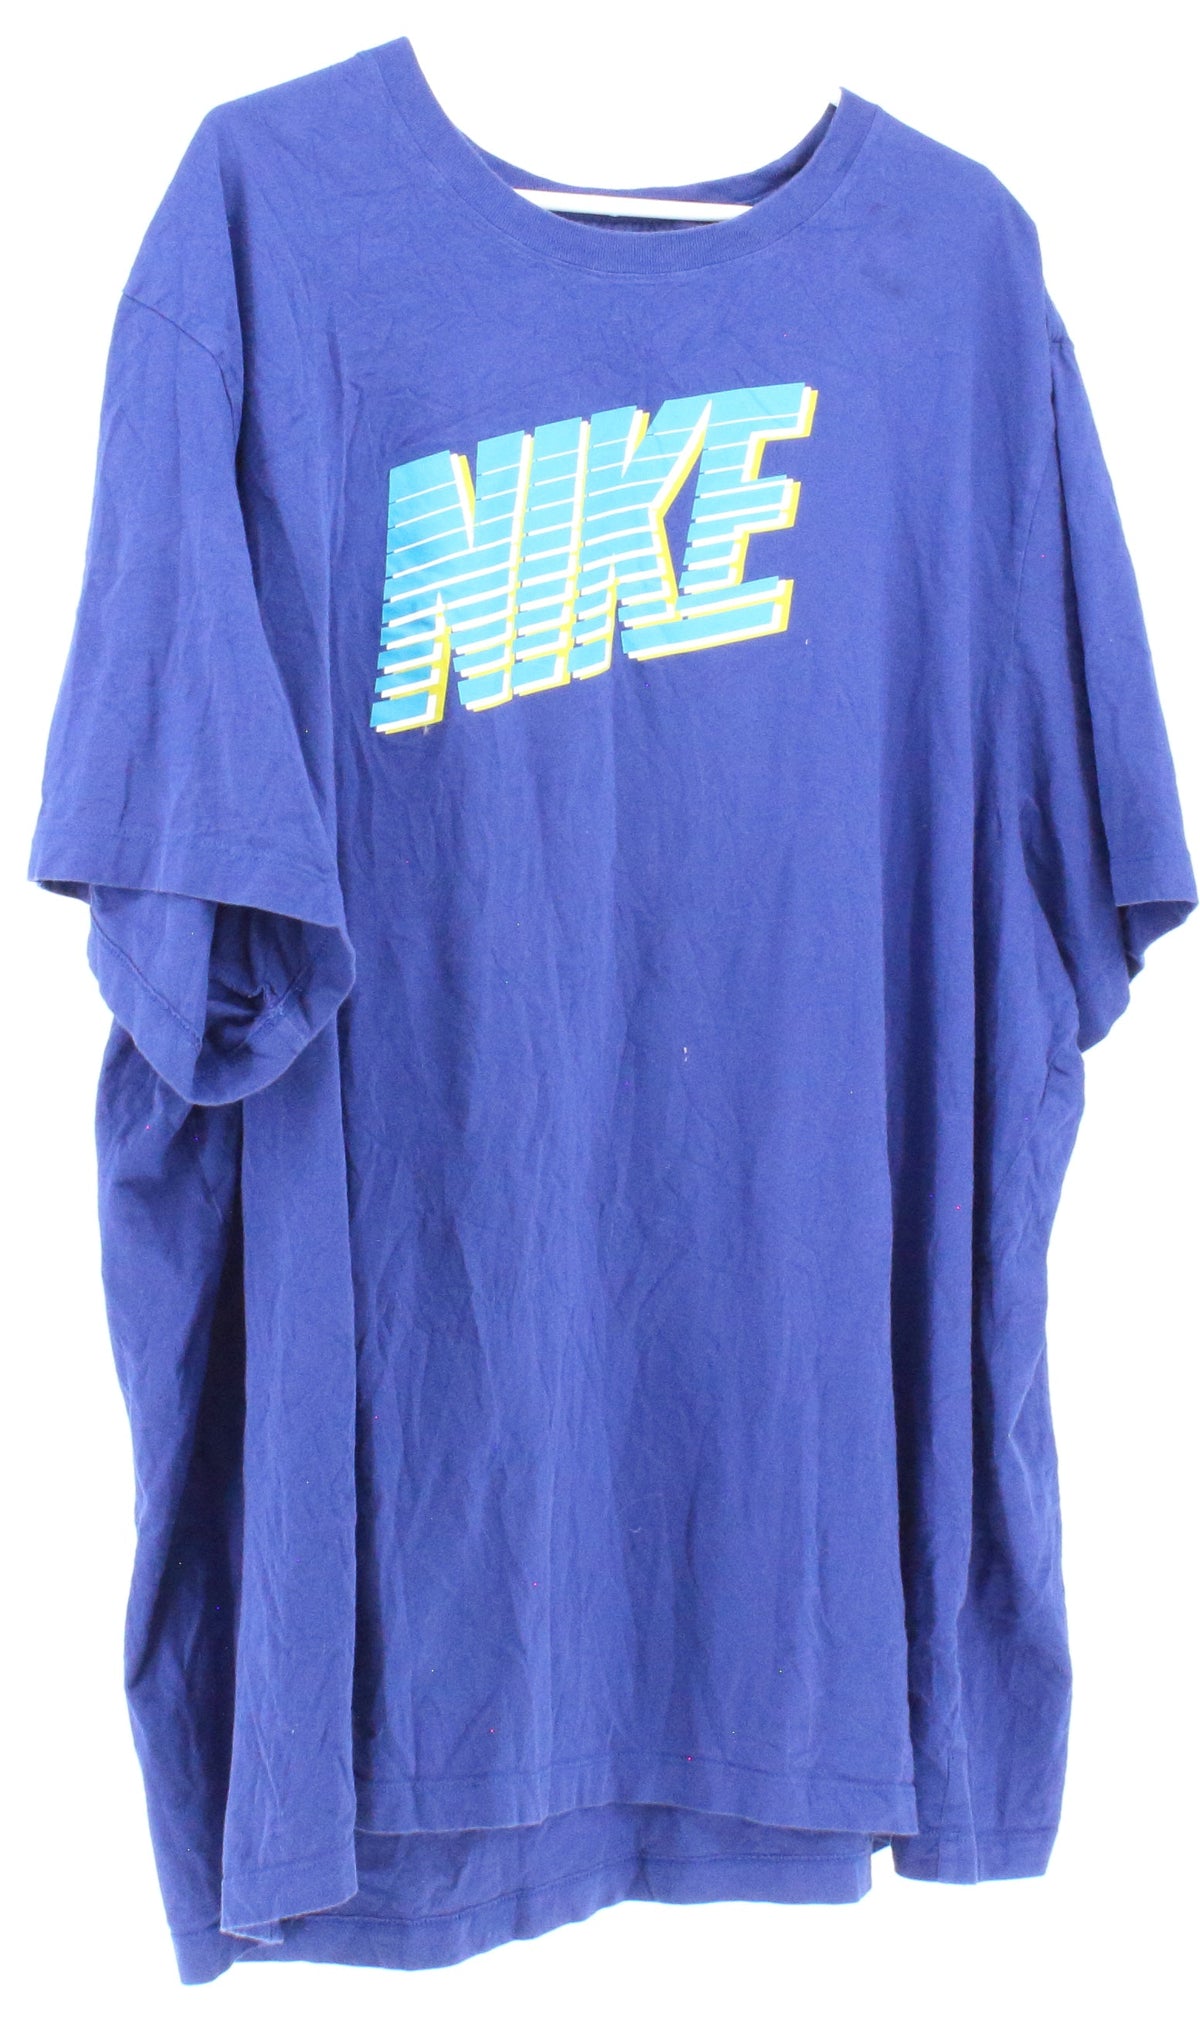 The Nike Tee Blue Front Graphic T-Shirt